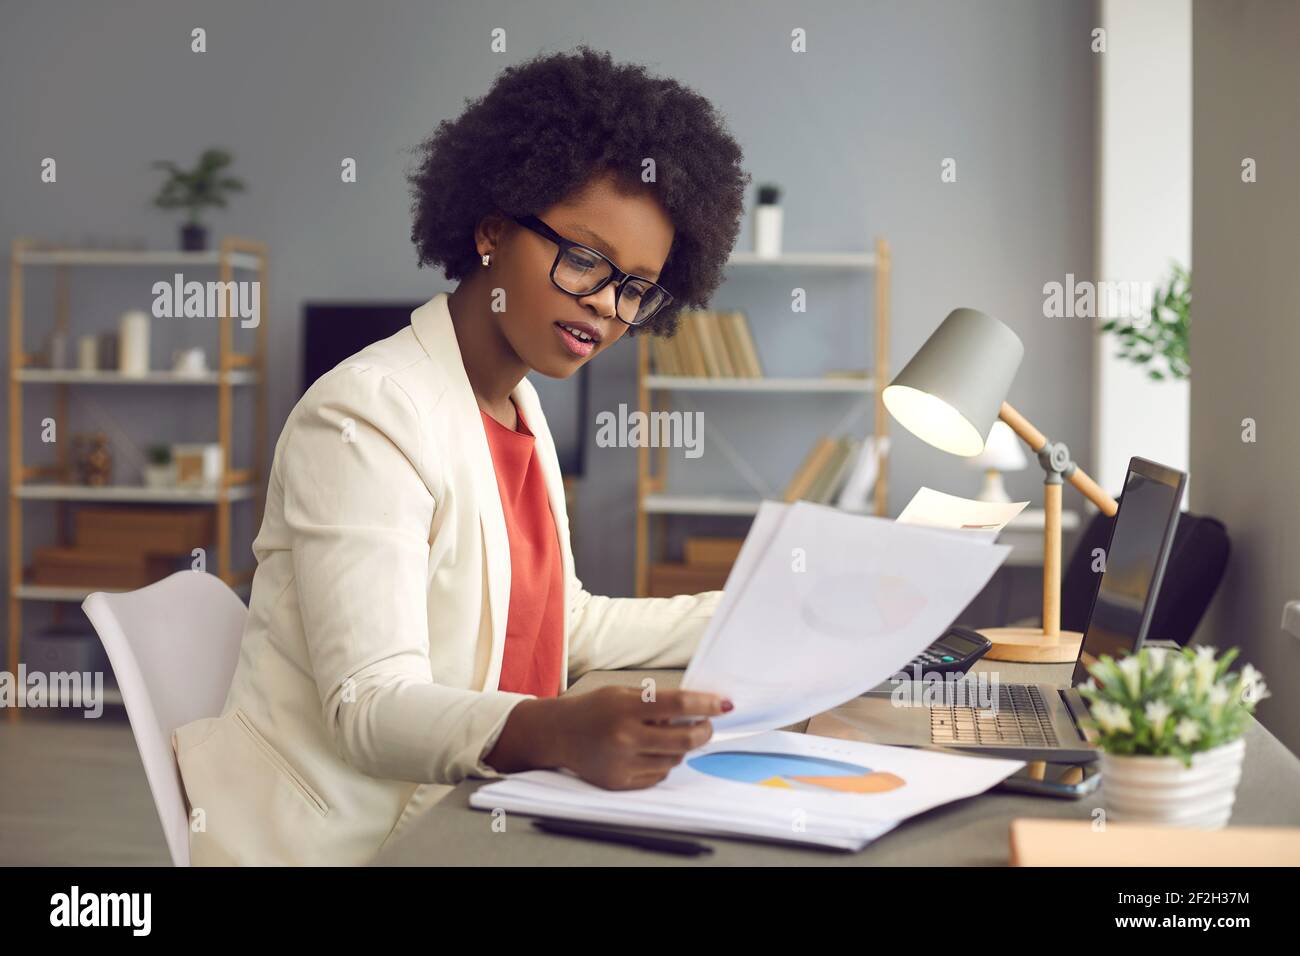 African american businesswoman working with documents and laptop at office desk Stock Photo